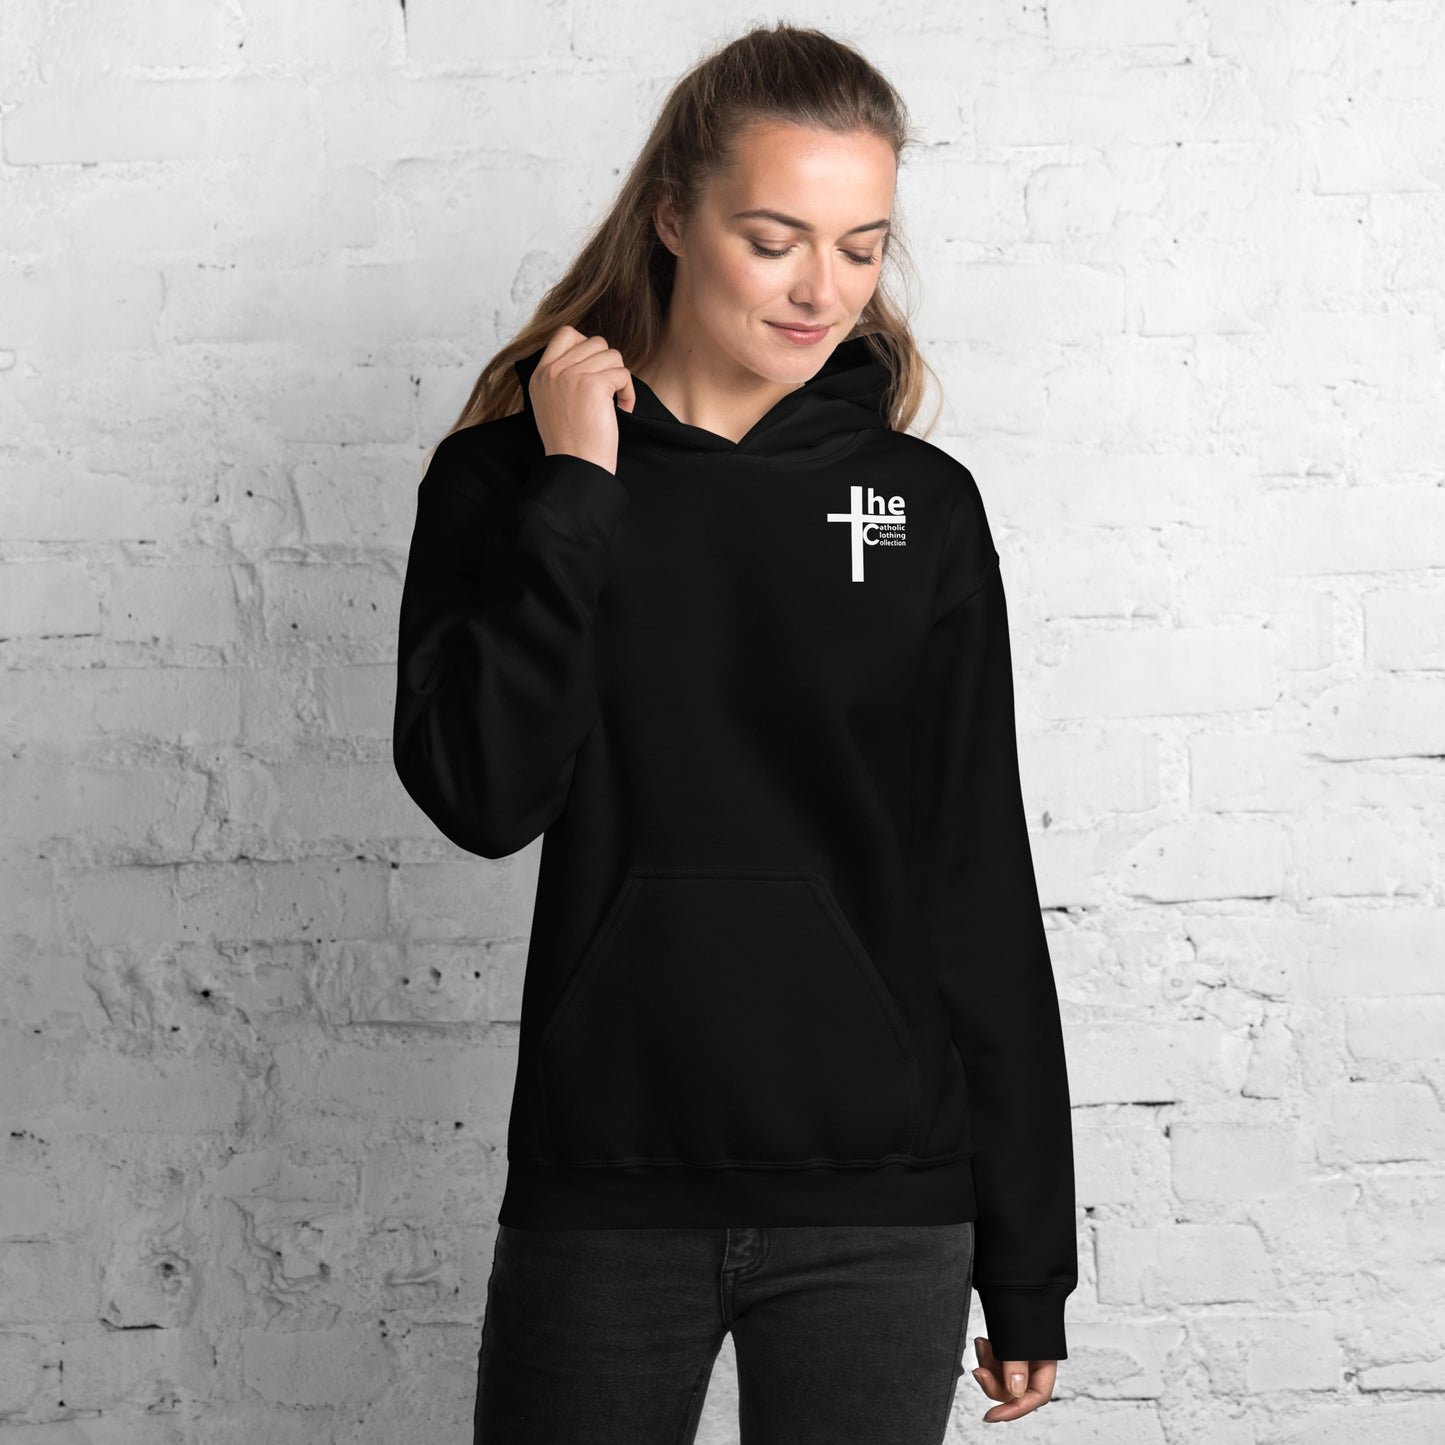 I Came, I Saw, God Conquered! Women's Hoodie